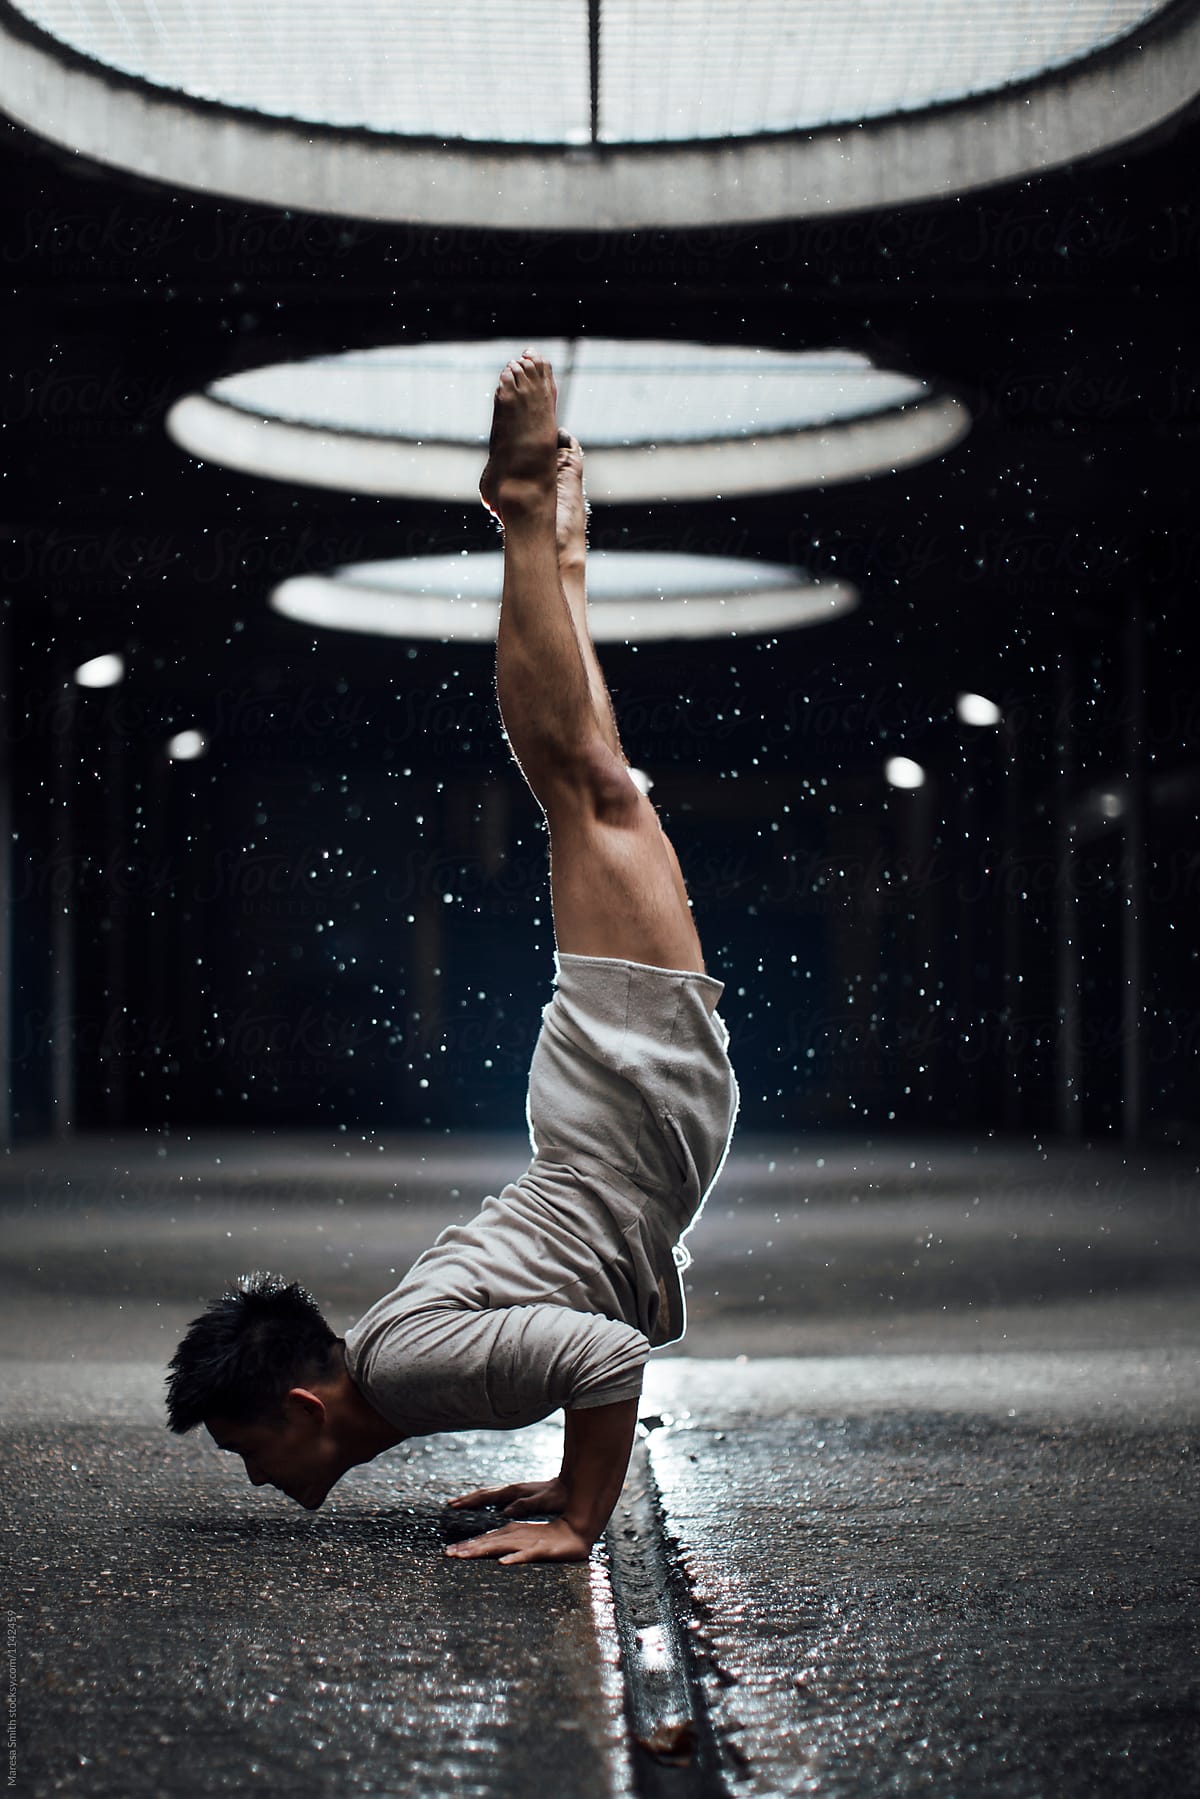 A male dancer and yoga artist practises a chinstand in an urban setting